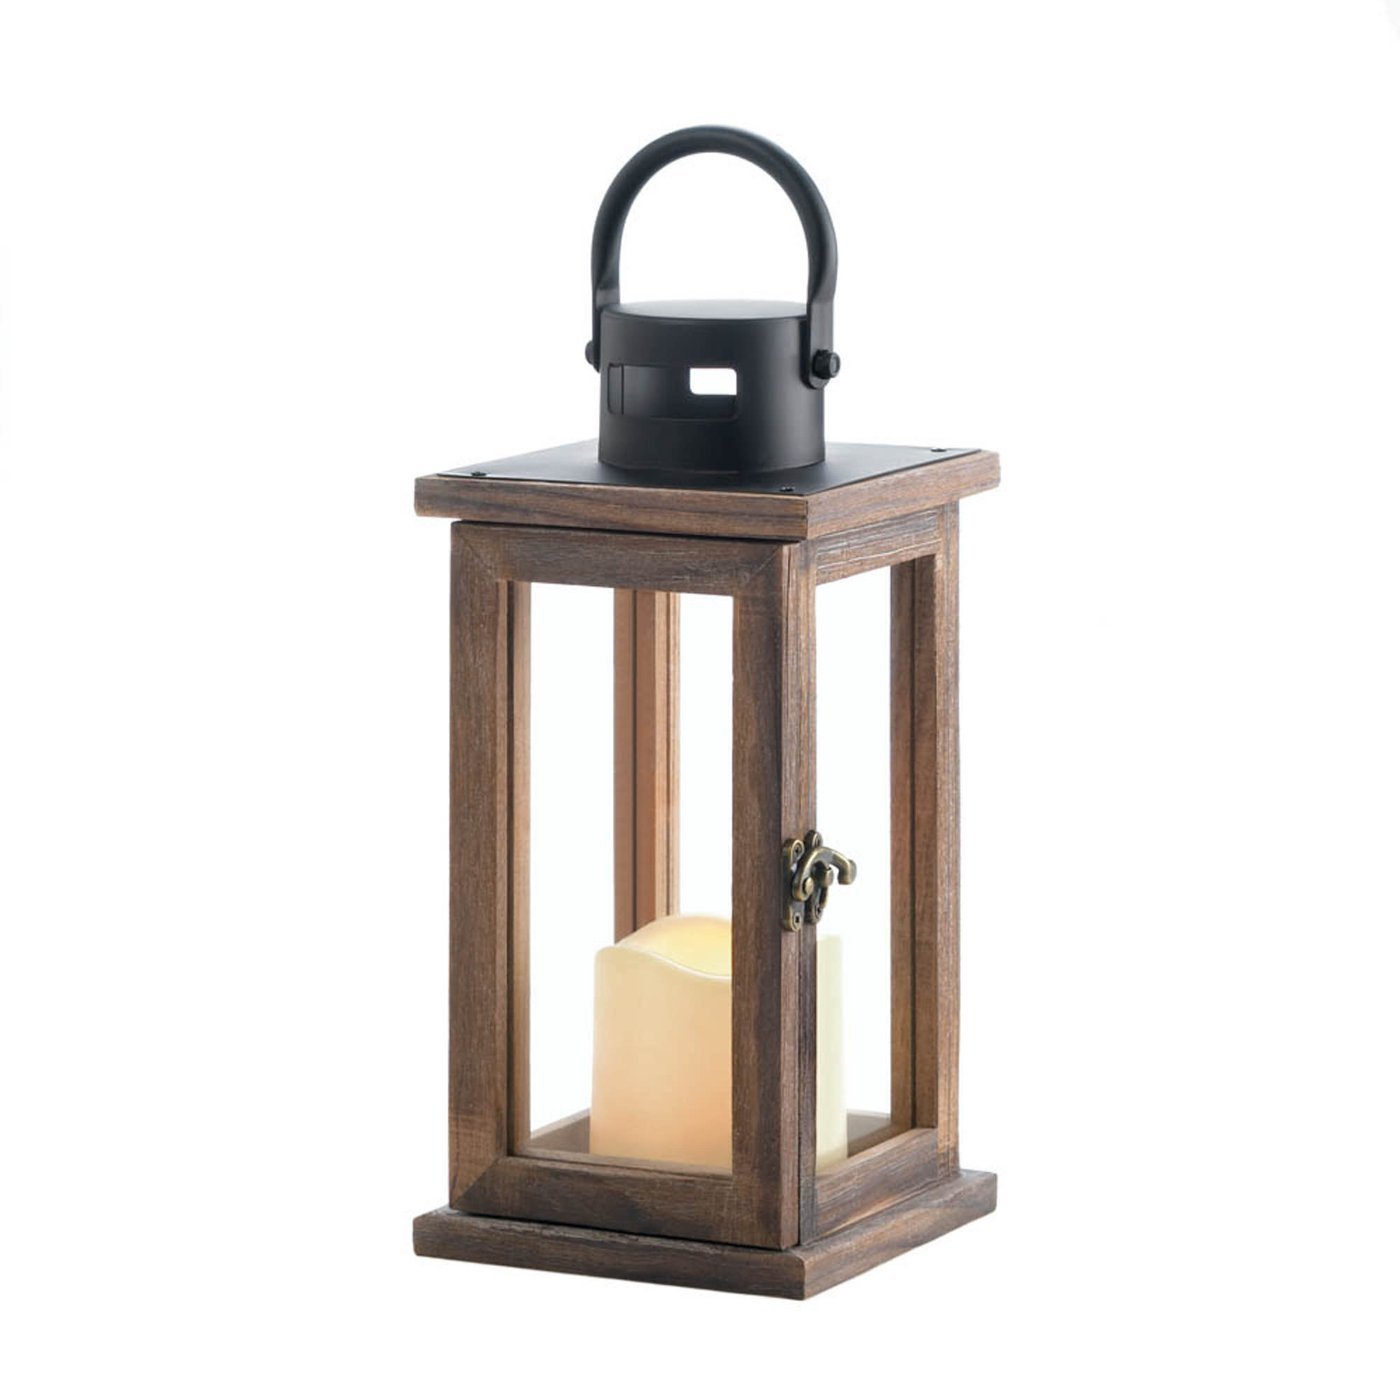 Lodge Wooden Lantern With Led Candle - $34.80